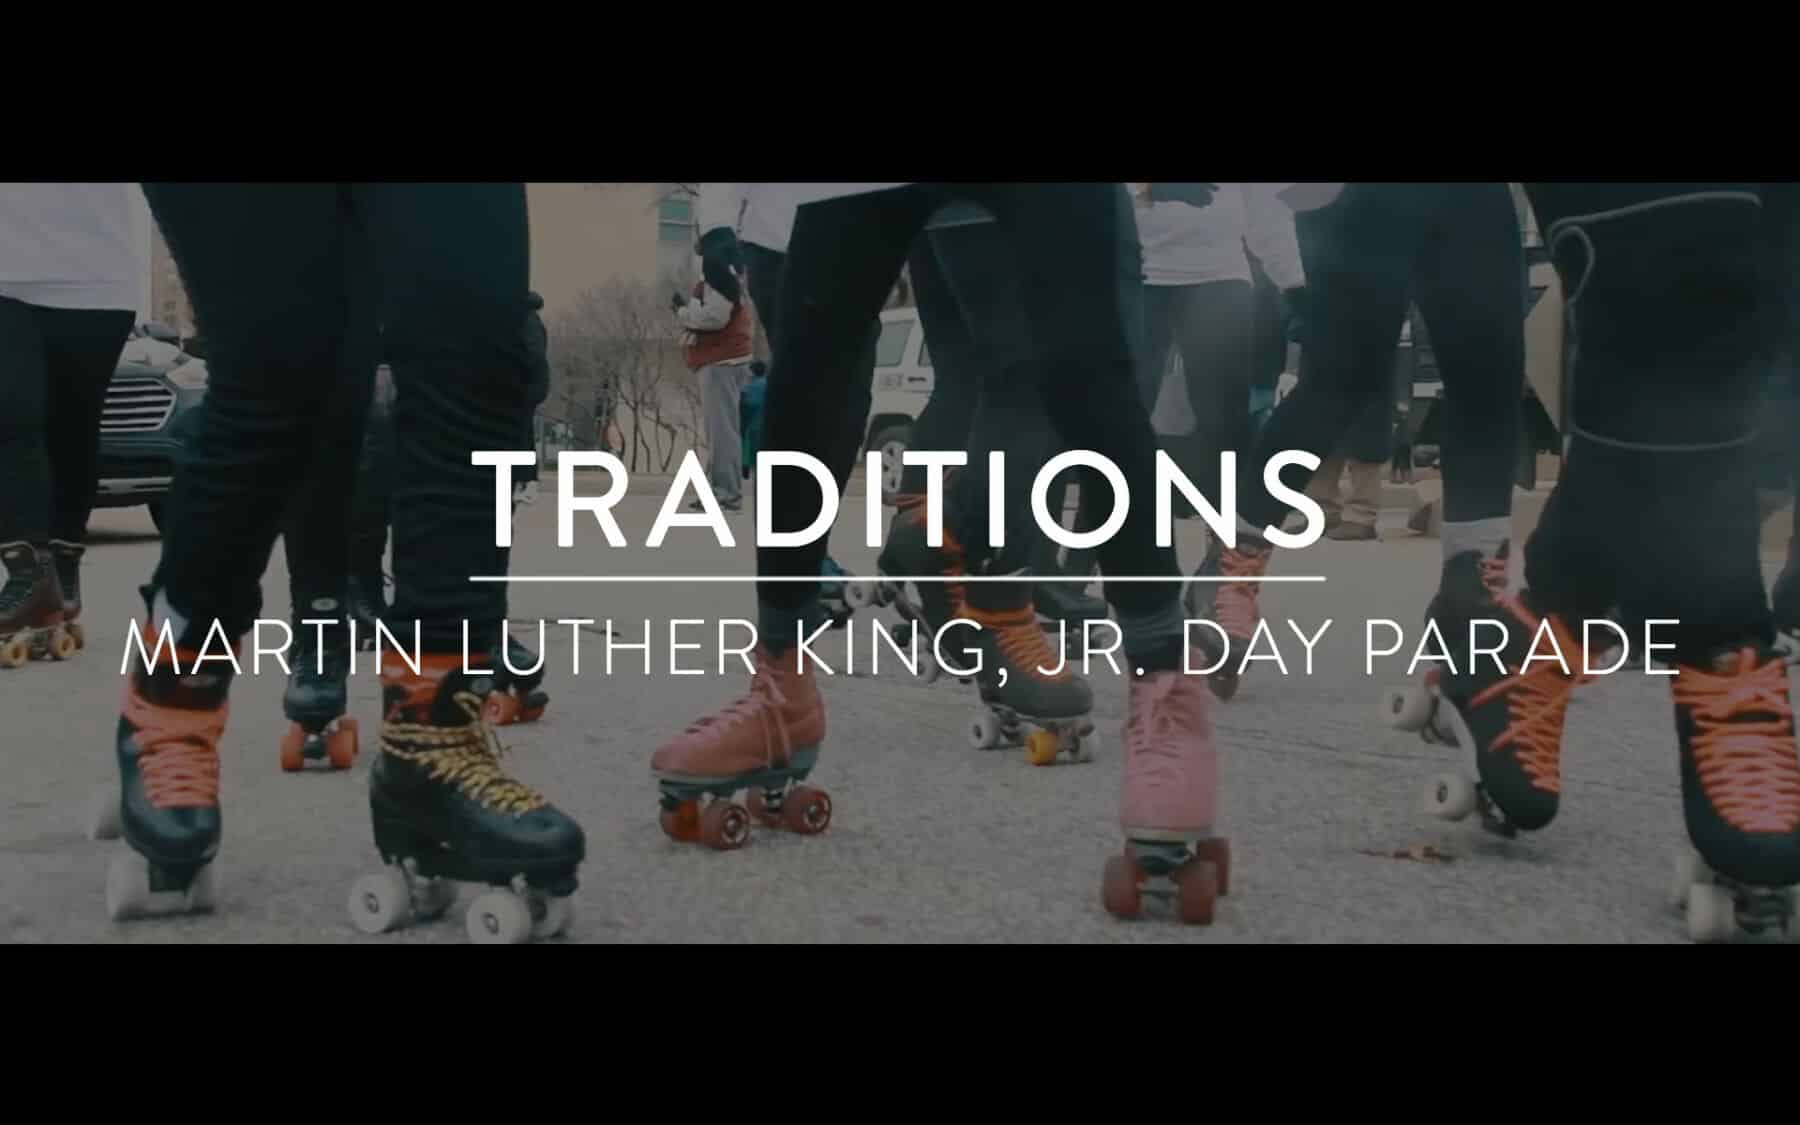 Martin Luther King, JR. Day Parade